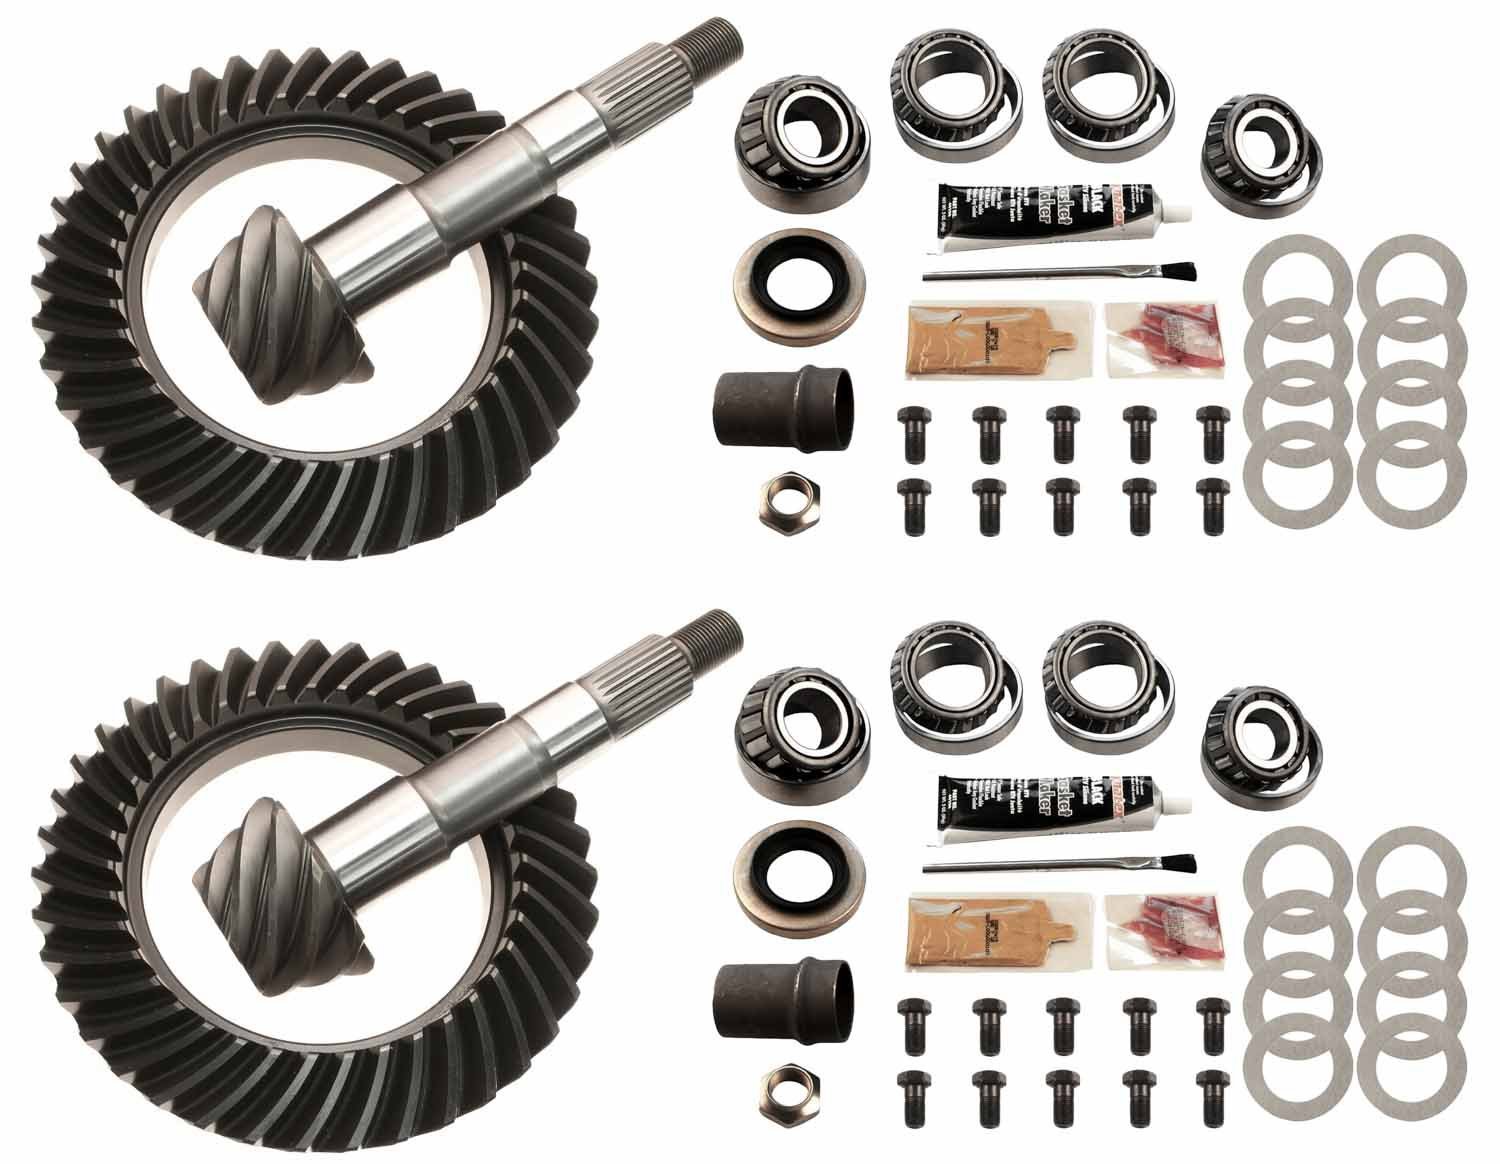 Complete Front and Rear Ring and Pinion Kit 1979-1985 Toyota Pickup 4-Cylinder, 1984-1985 Toyota 4Runner 4-Cylinder - 4.56 Ratio